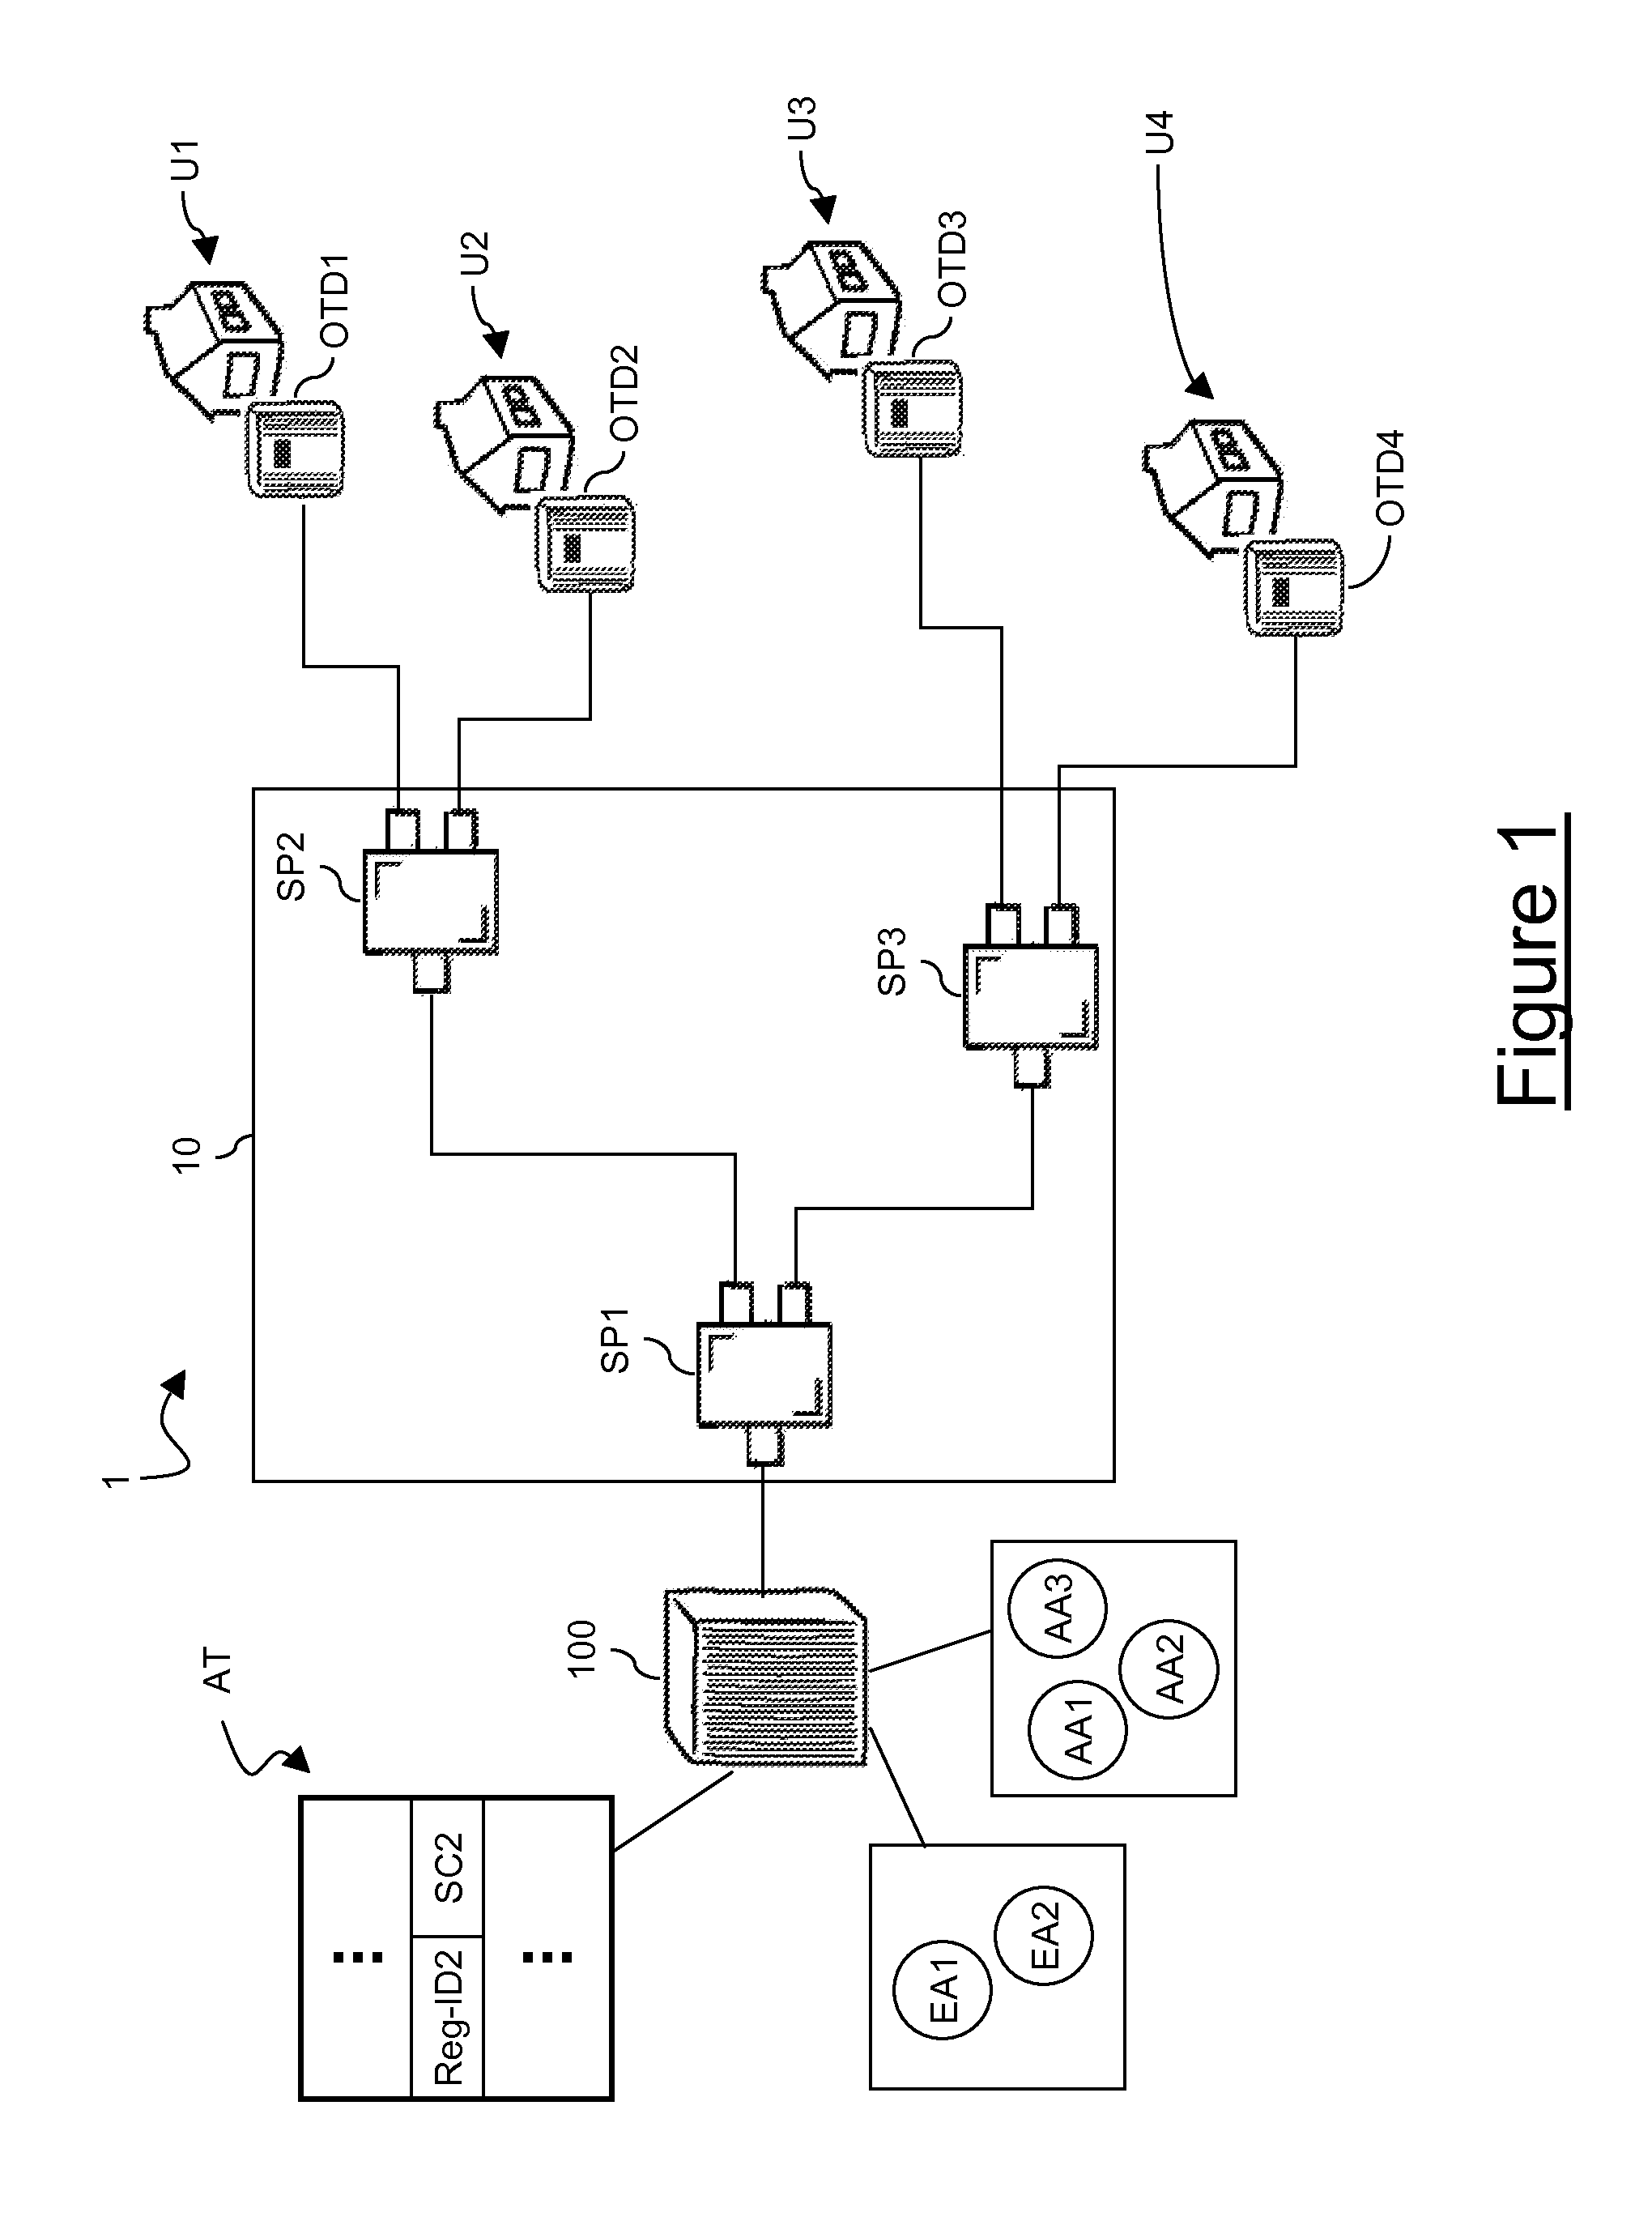 Method for Increasing Security in a Passive Optical Network